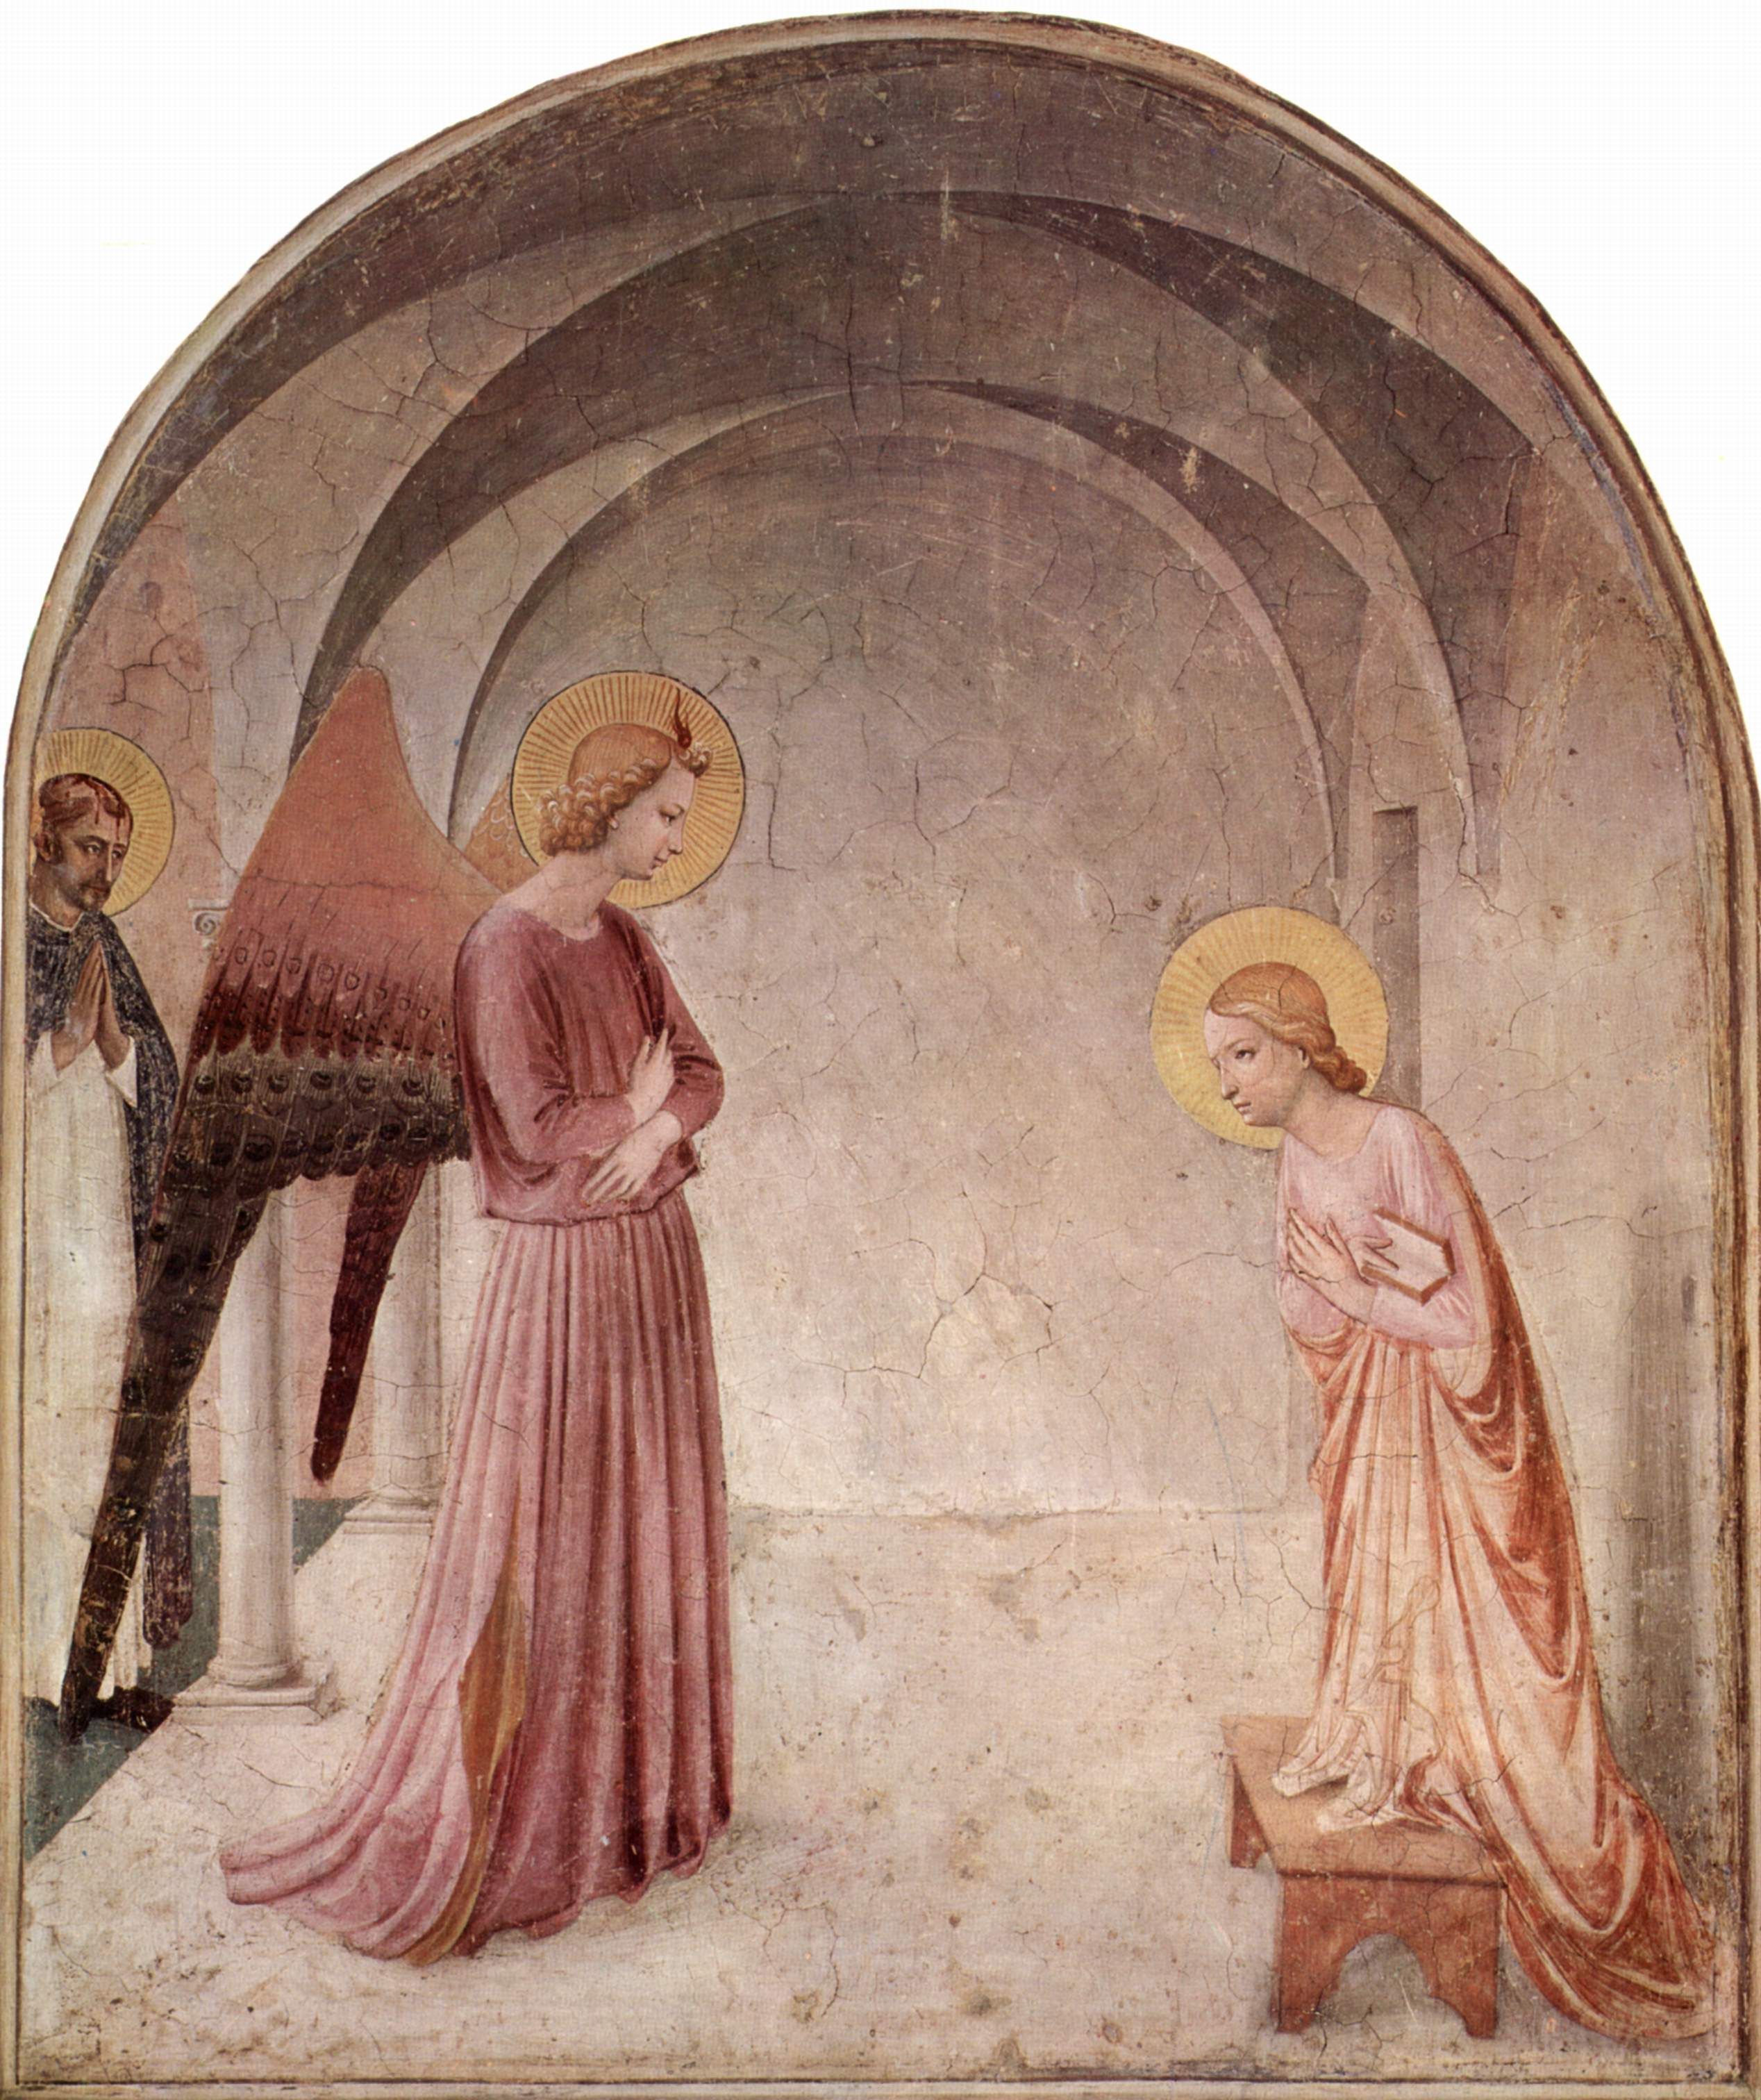 FRA ANGELICO THE LIGHT OF THE